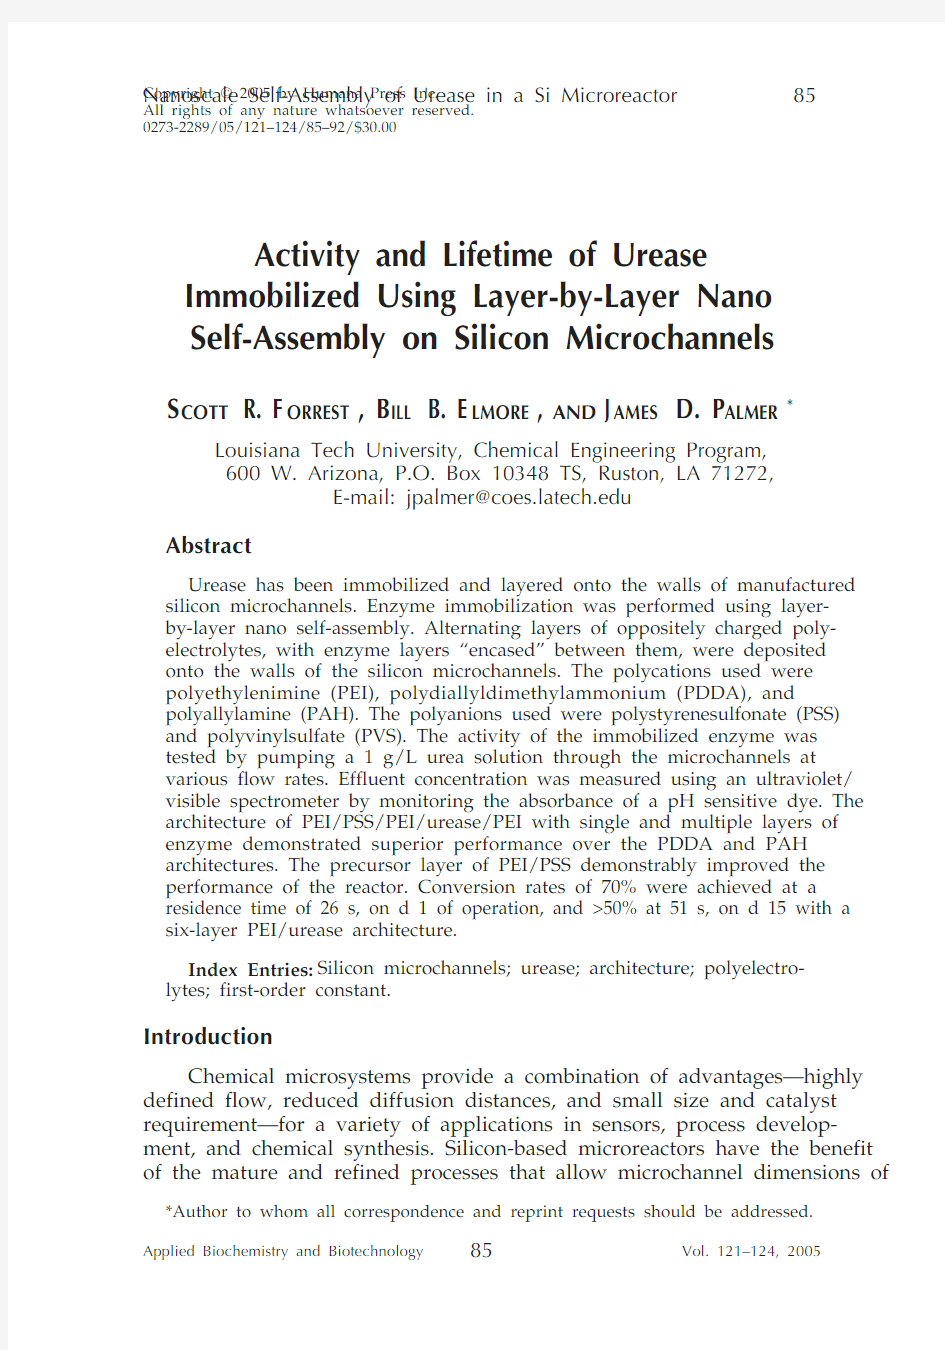 Activity and lifetime of urease immobilized using layer-by-layer nano self-assembly